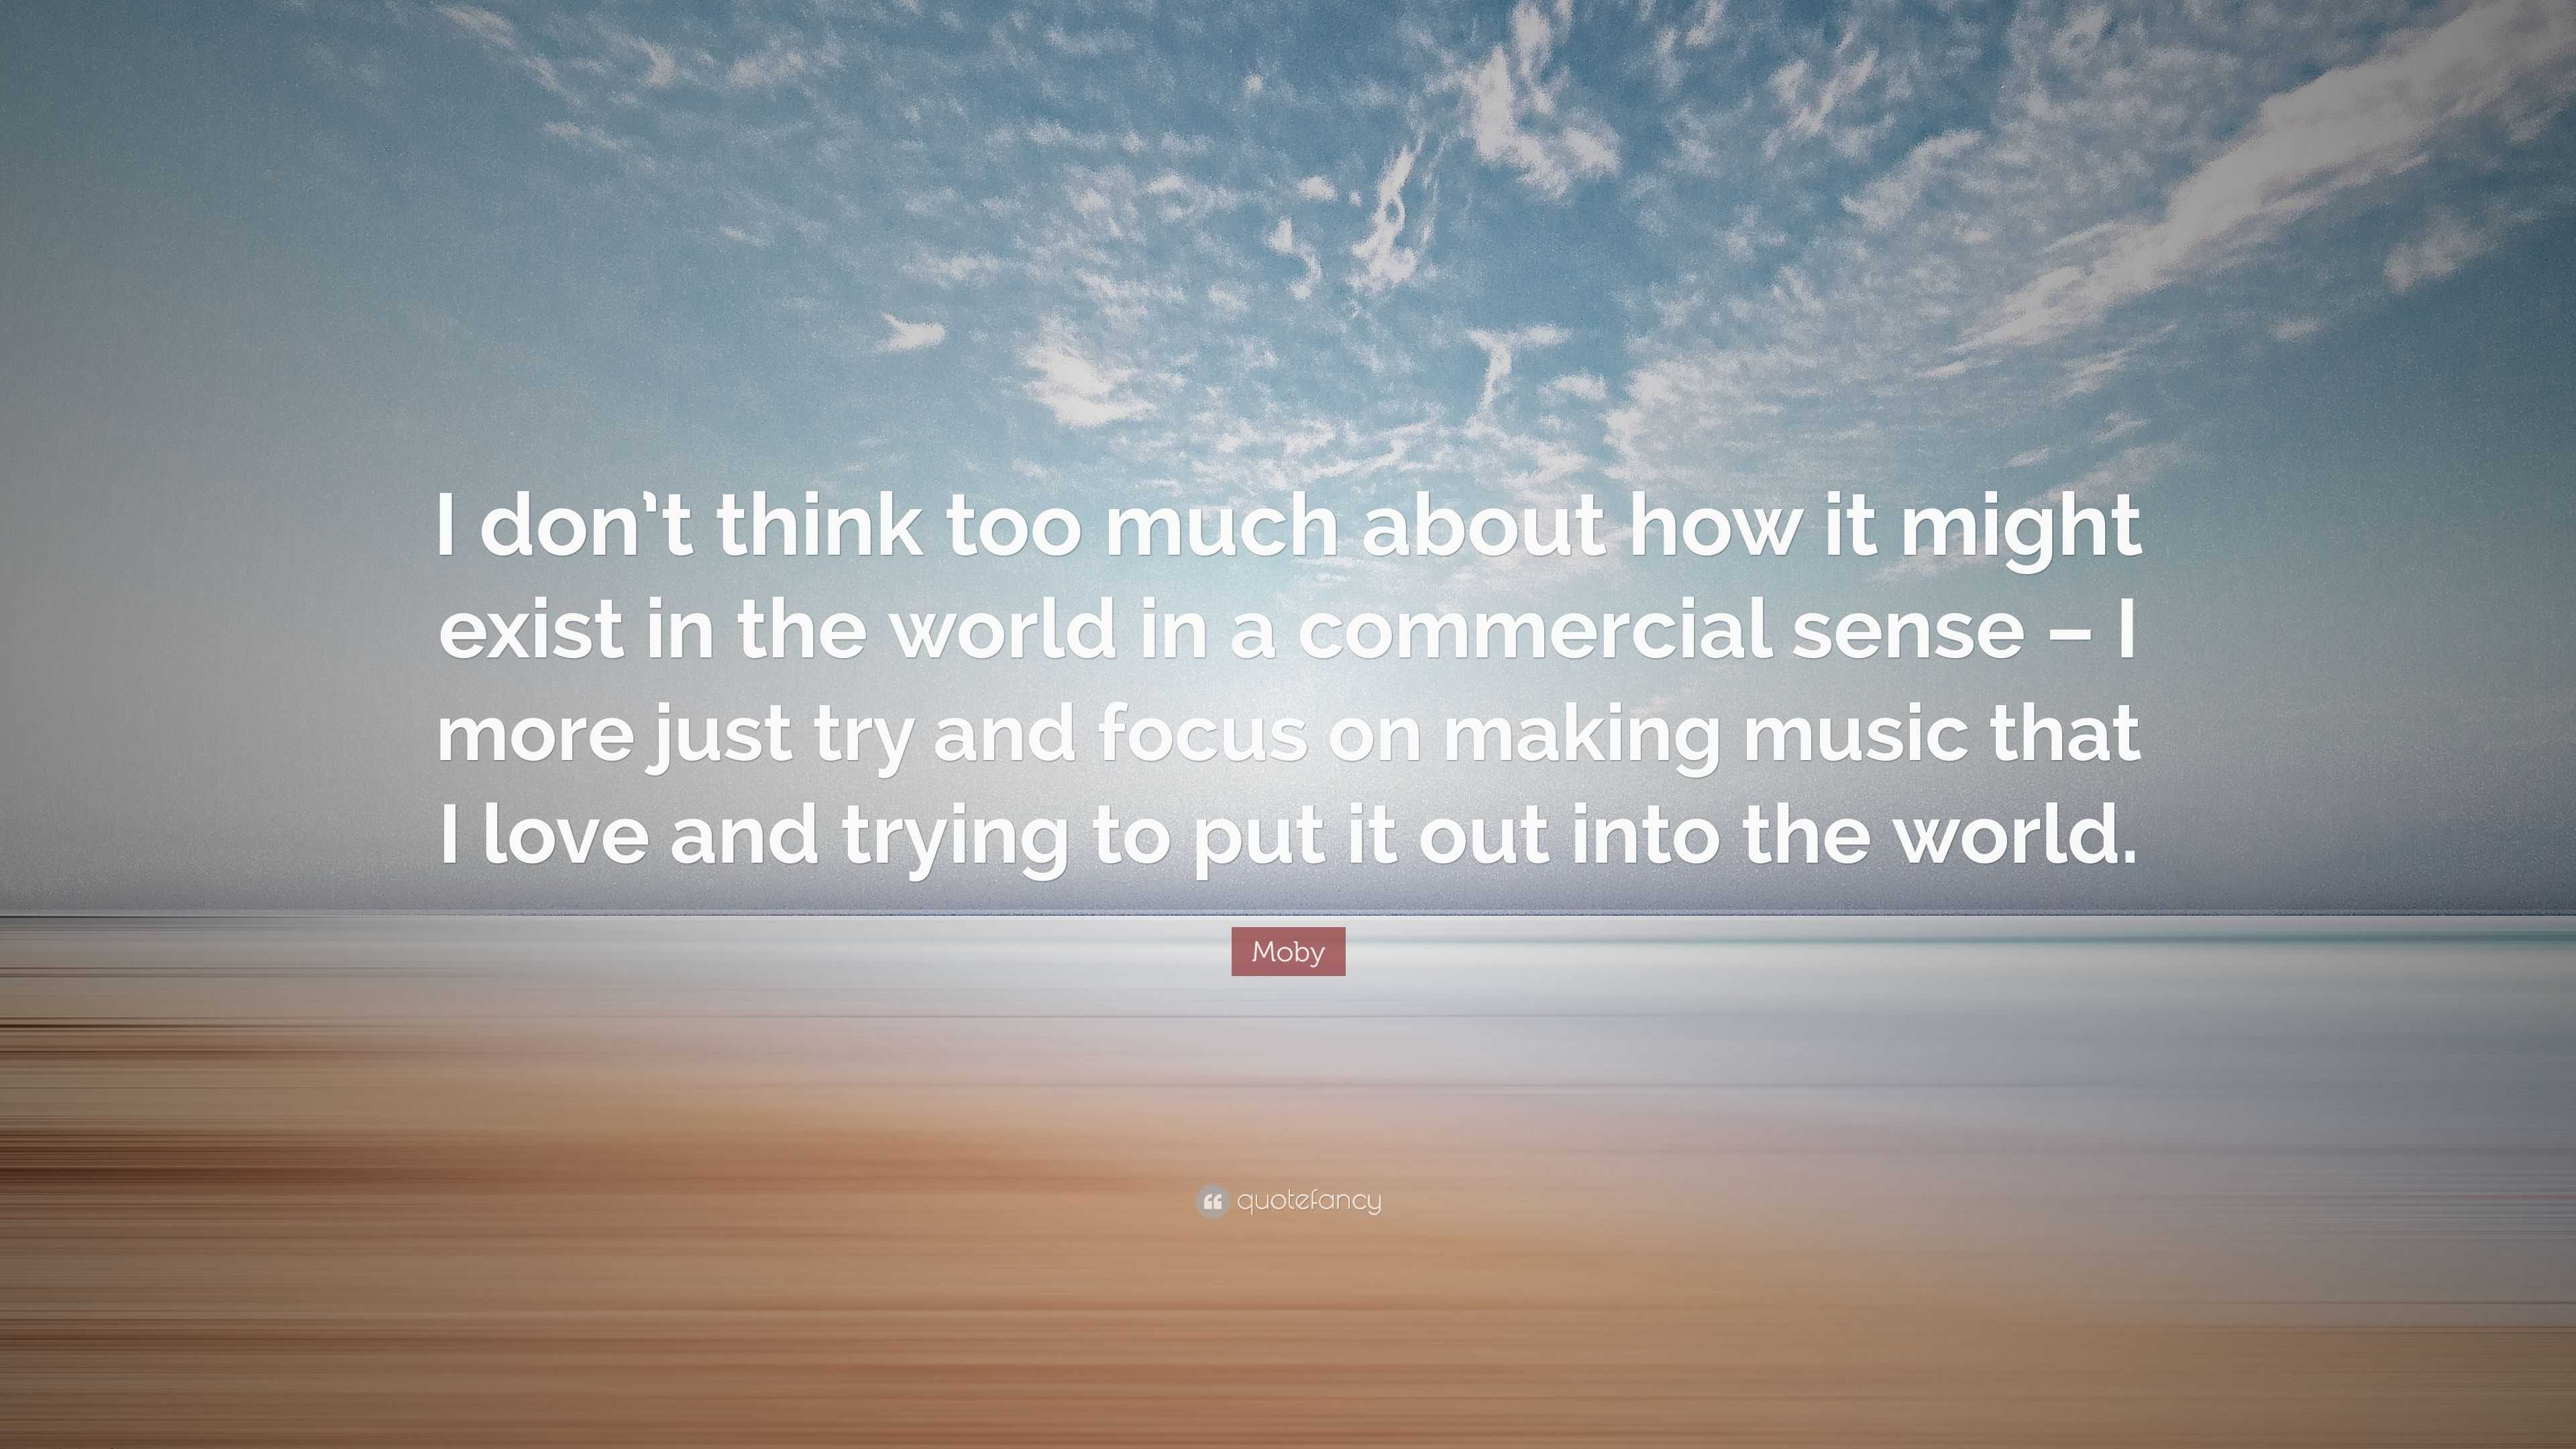 Moby Quote: “I Don't Think Too Much About How It Might Exist In The World In A Commercial Sense – I More Just Try And Focus On Making...”